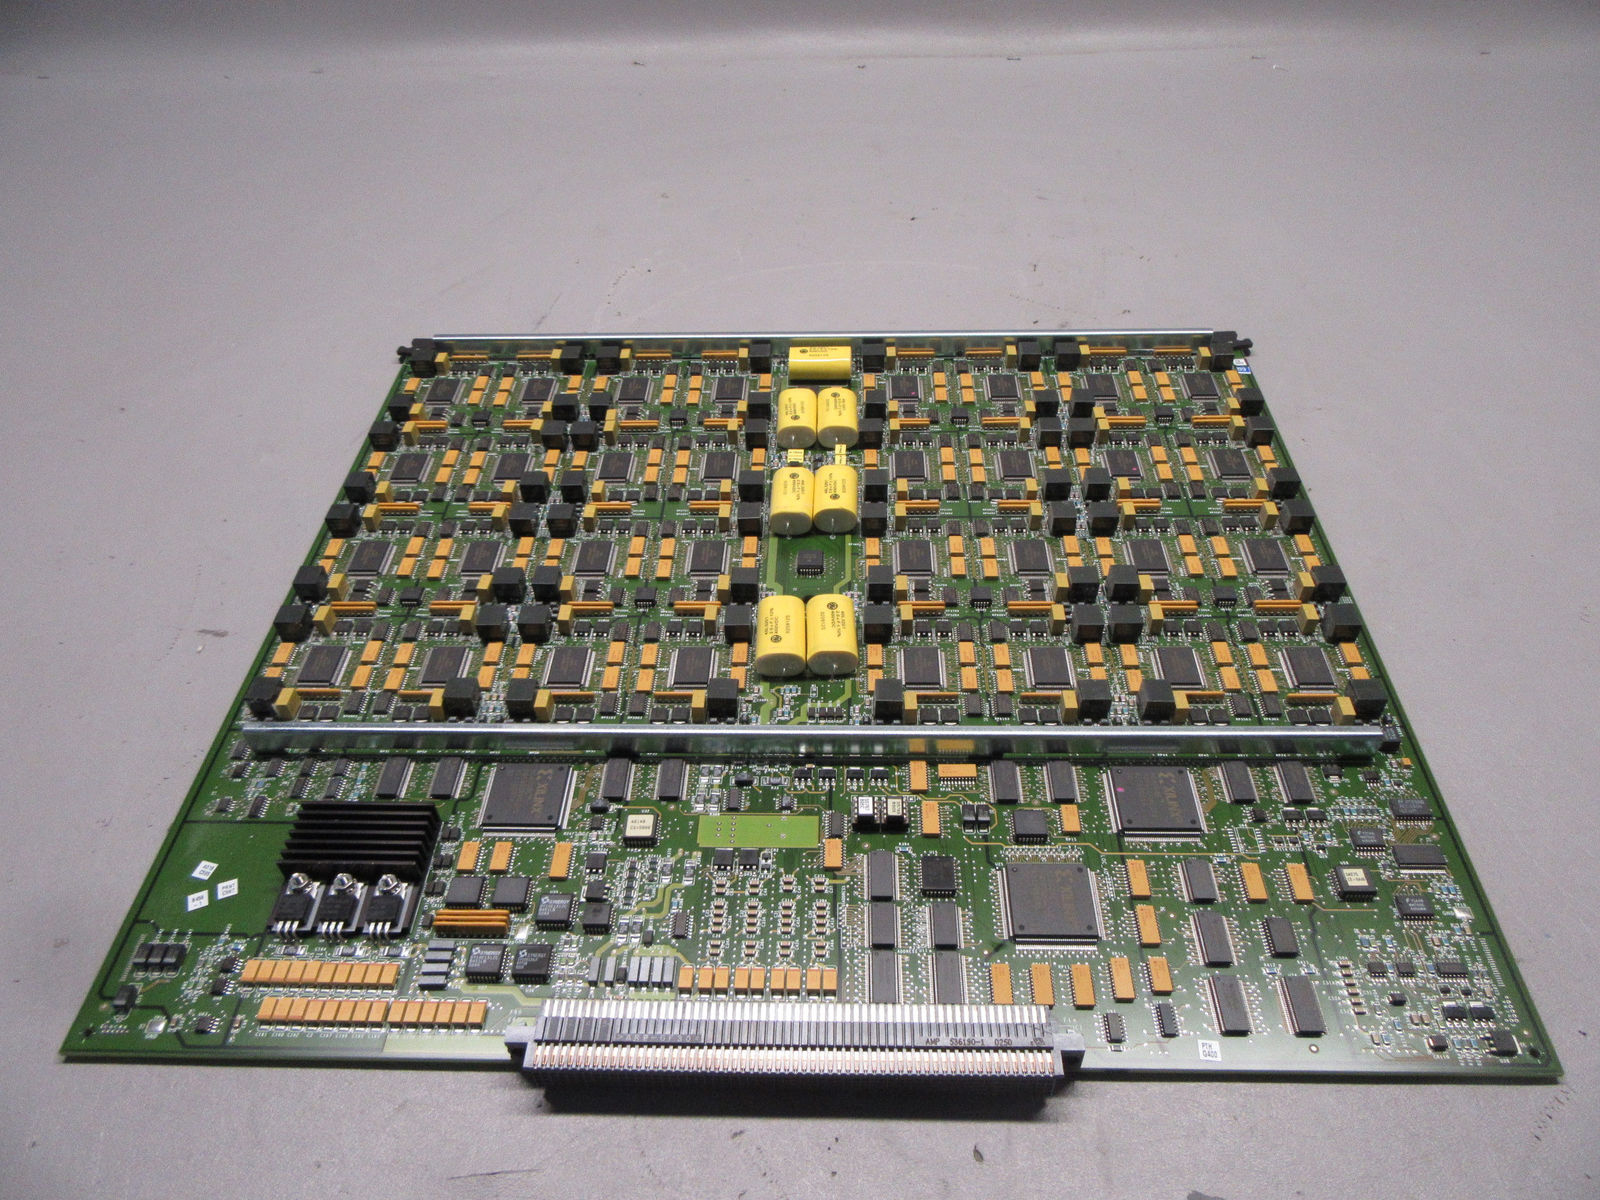 Acuson TX3 08239142 Board For Siemens Sequoia 512 Ultrasound DIAGNOSTIC ULTRASOUND MACHINES FOR SALE